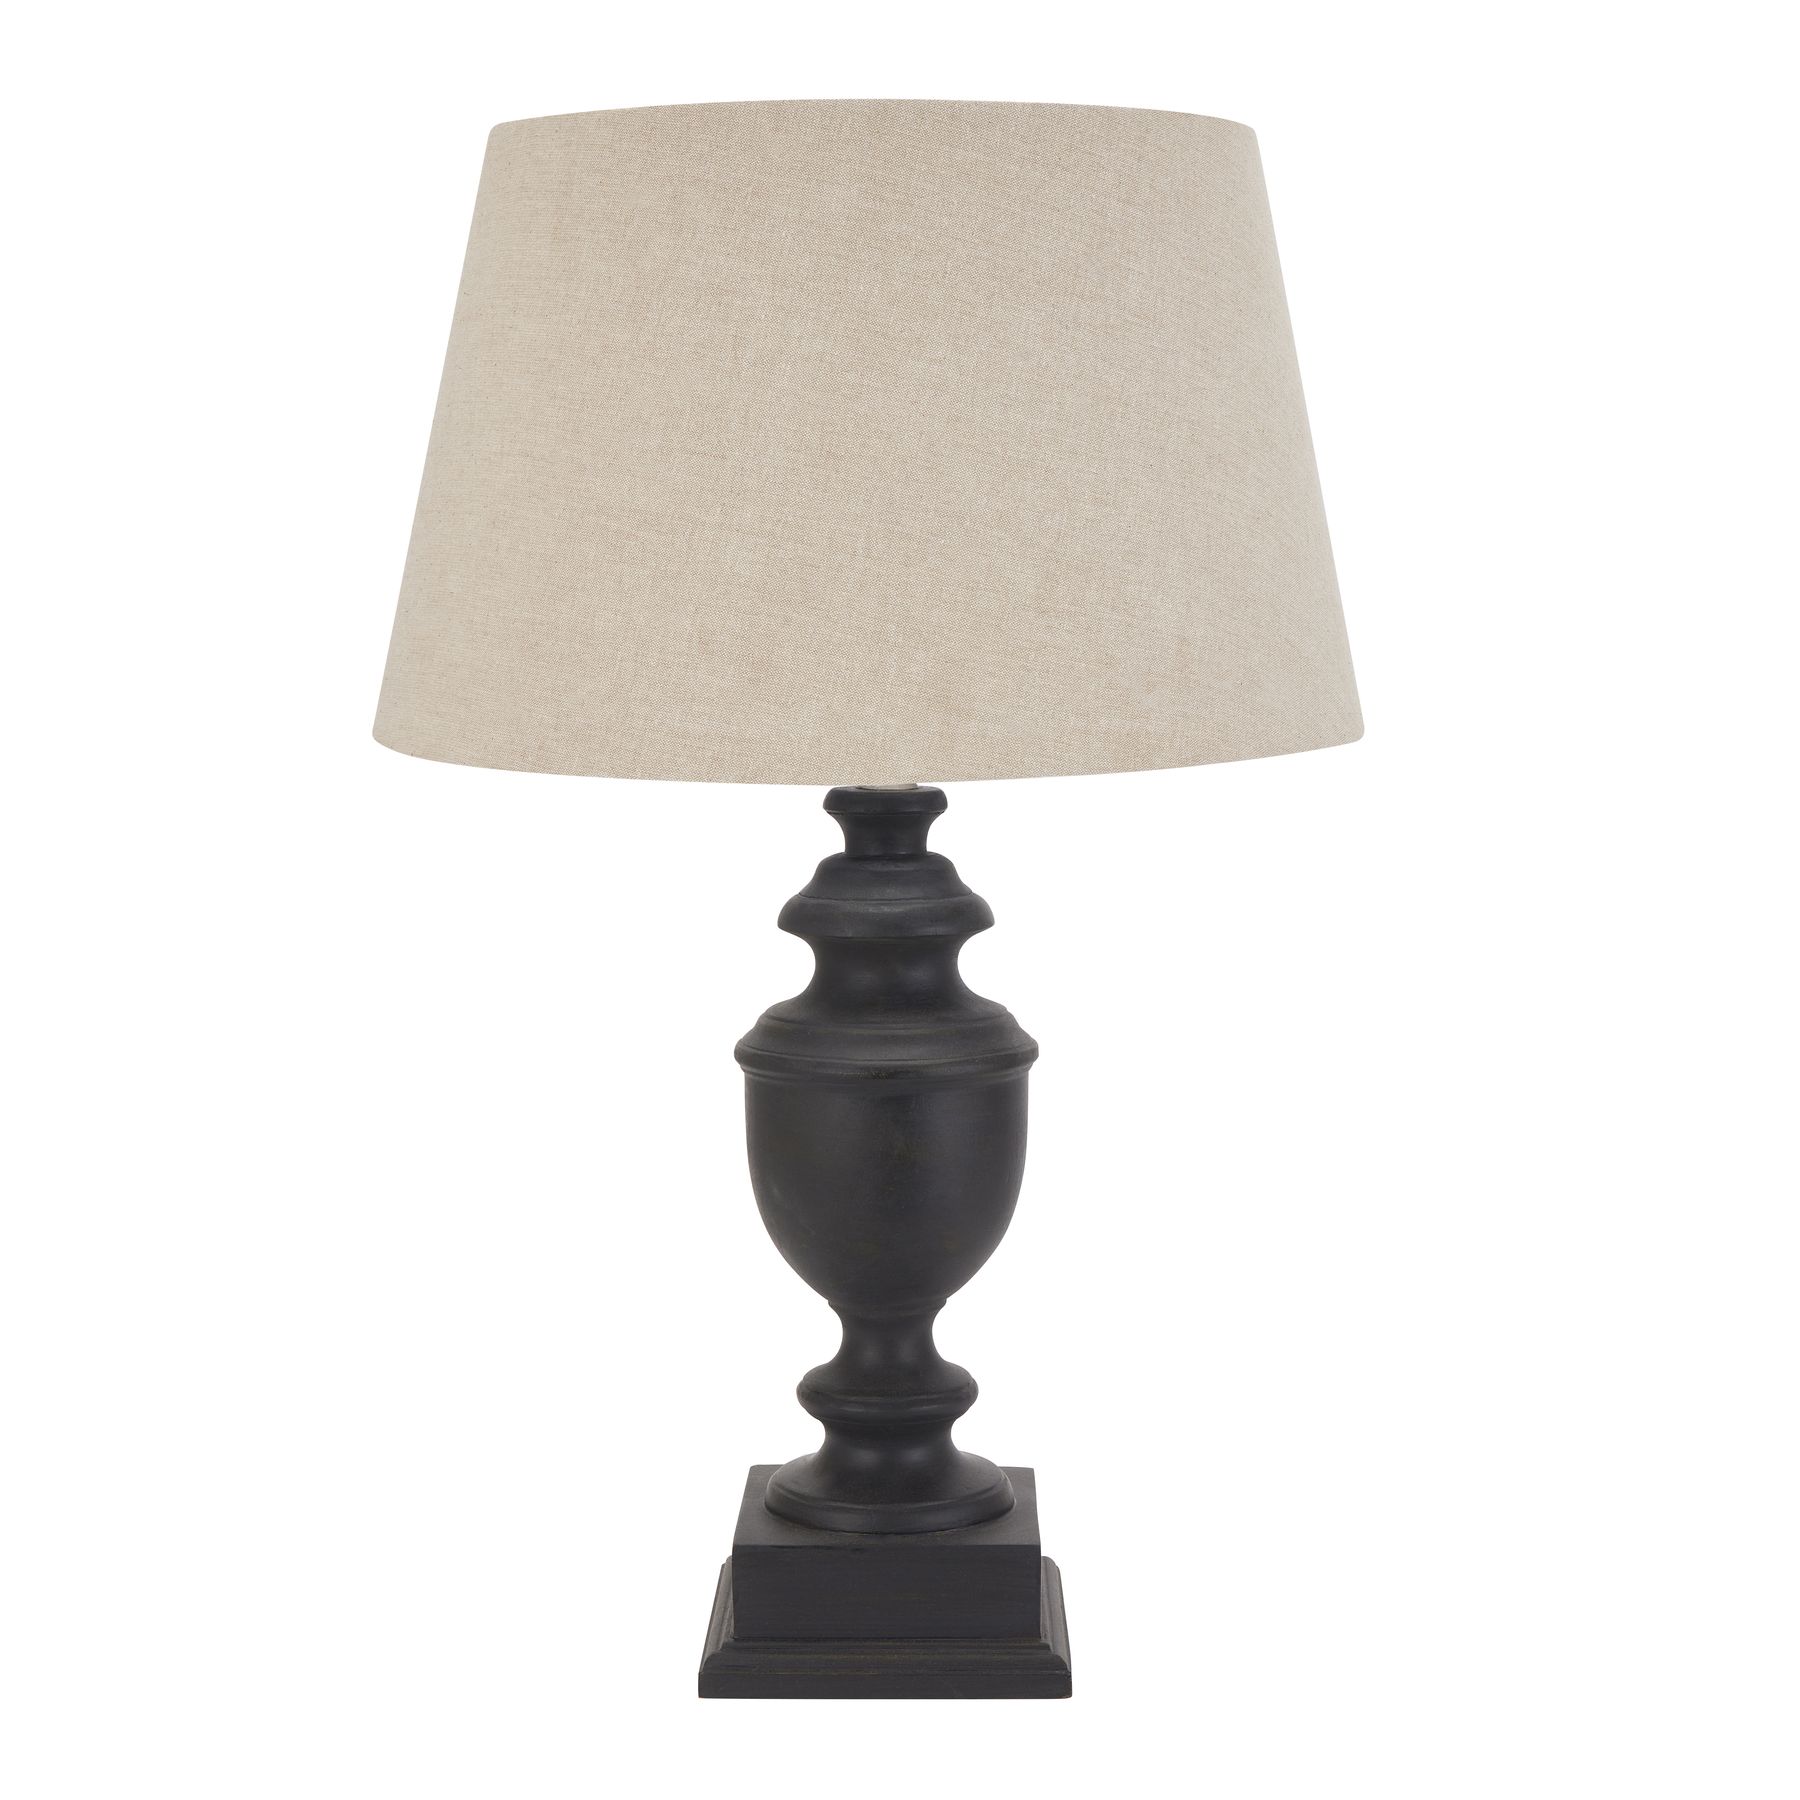 Delaney Collection Grey Urn Lamp With Linen Shade - Image 1